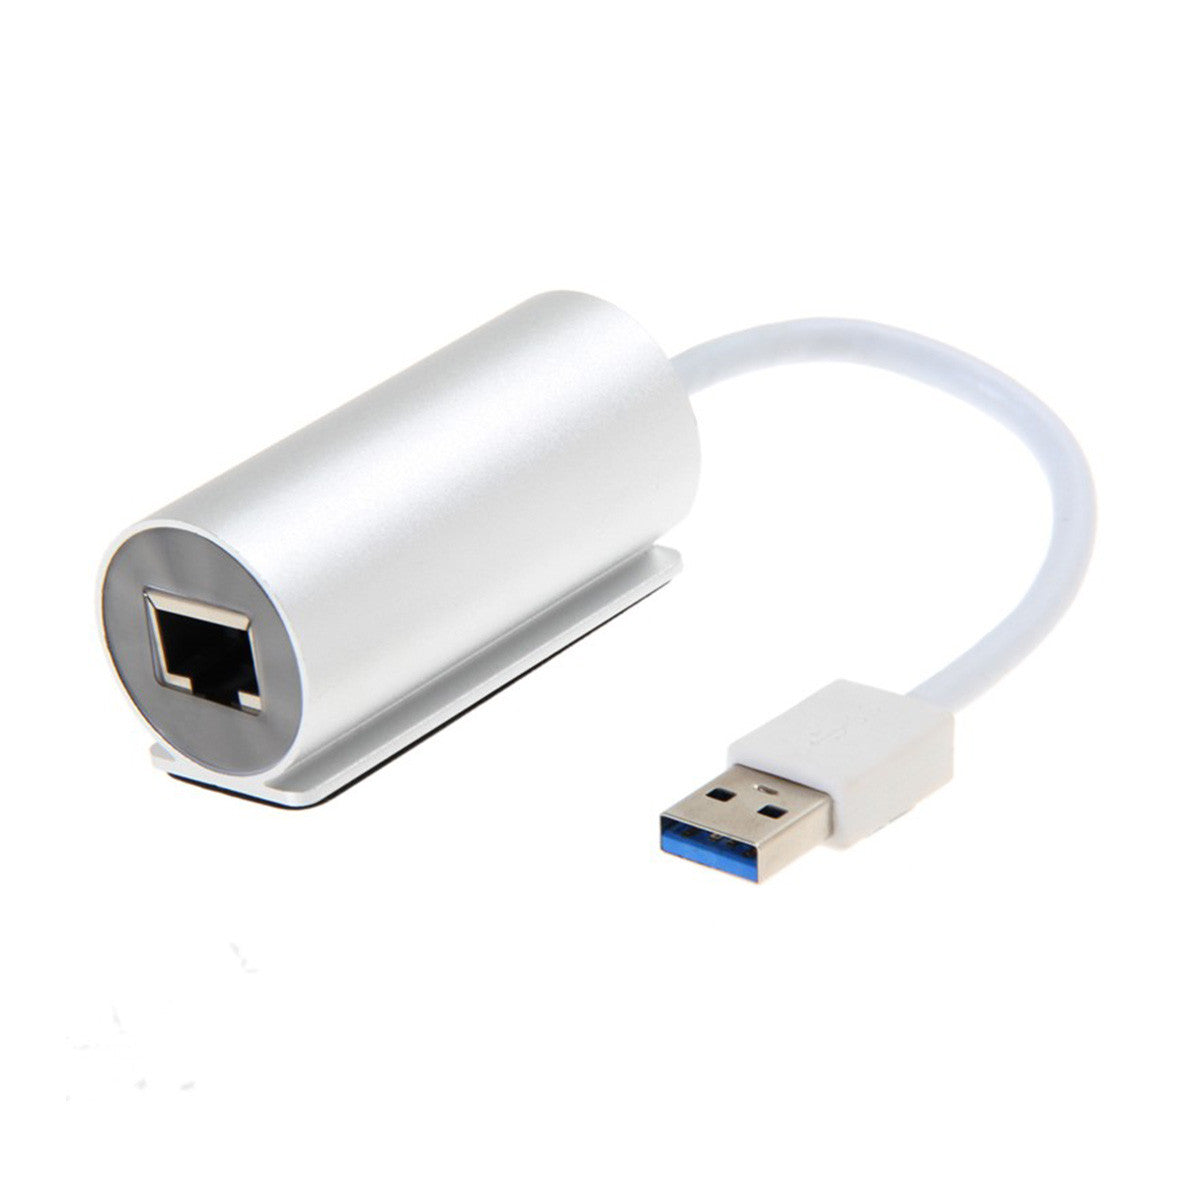 Mobile USB to Ethernet Adapter RJ45 LAN 1000Mbps Macbook A